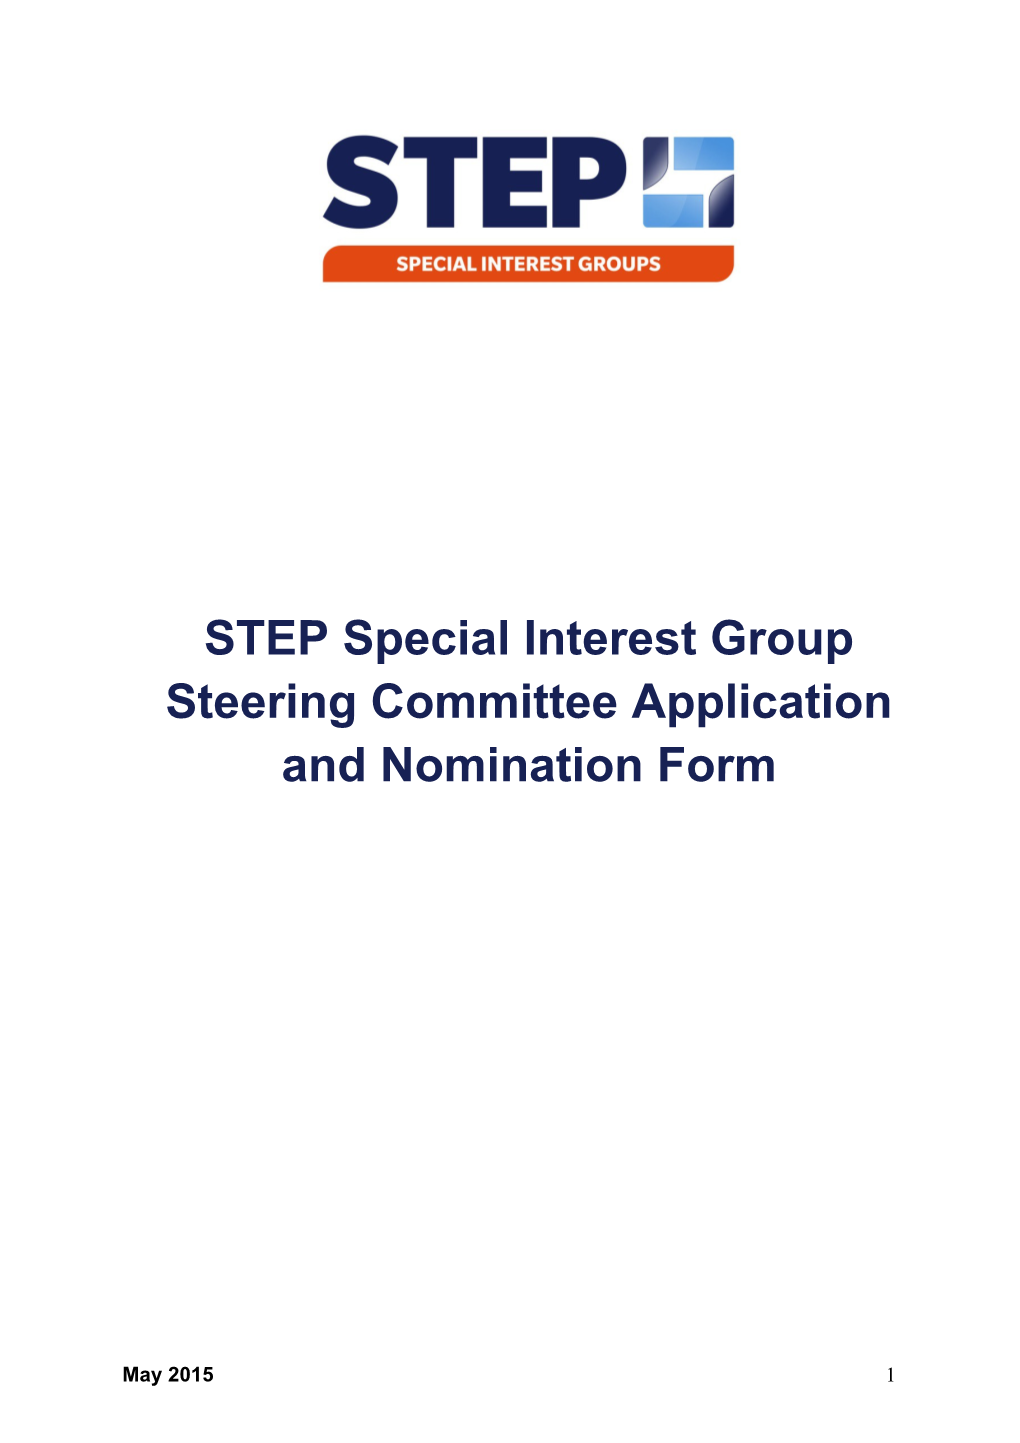 STEP Special Interest Group Steering Committee Application and Nomination Form